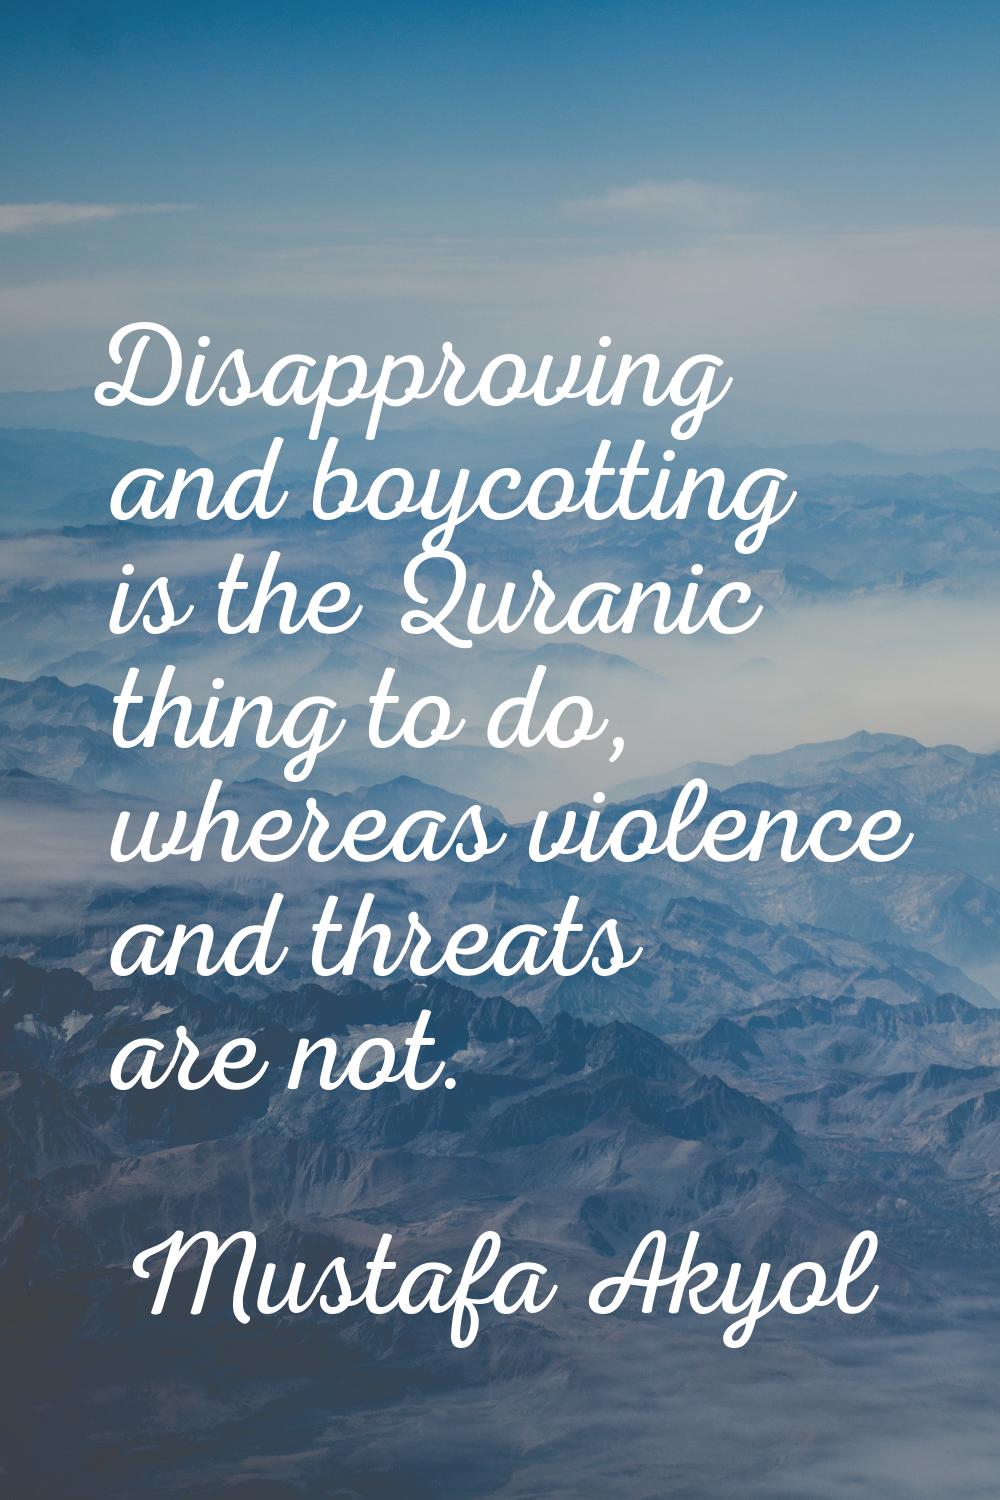 Disapproving and boycotting is the Quranic thing to do, whereas violence and threats are not.